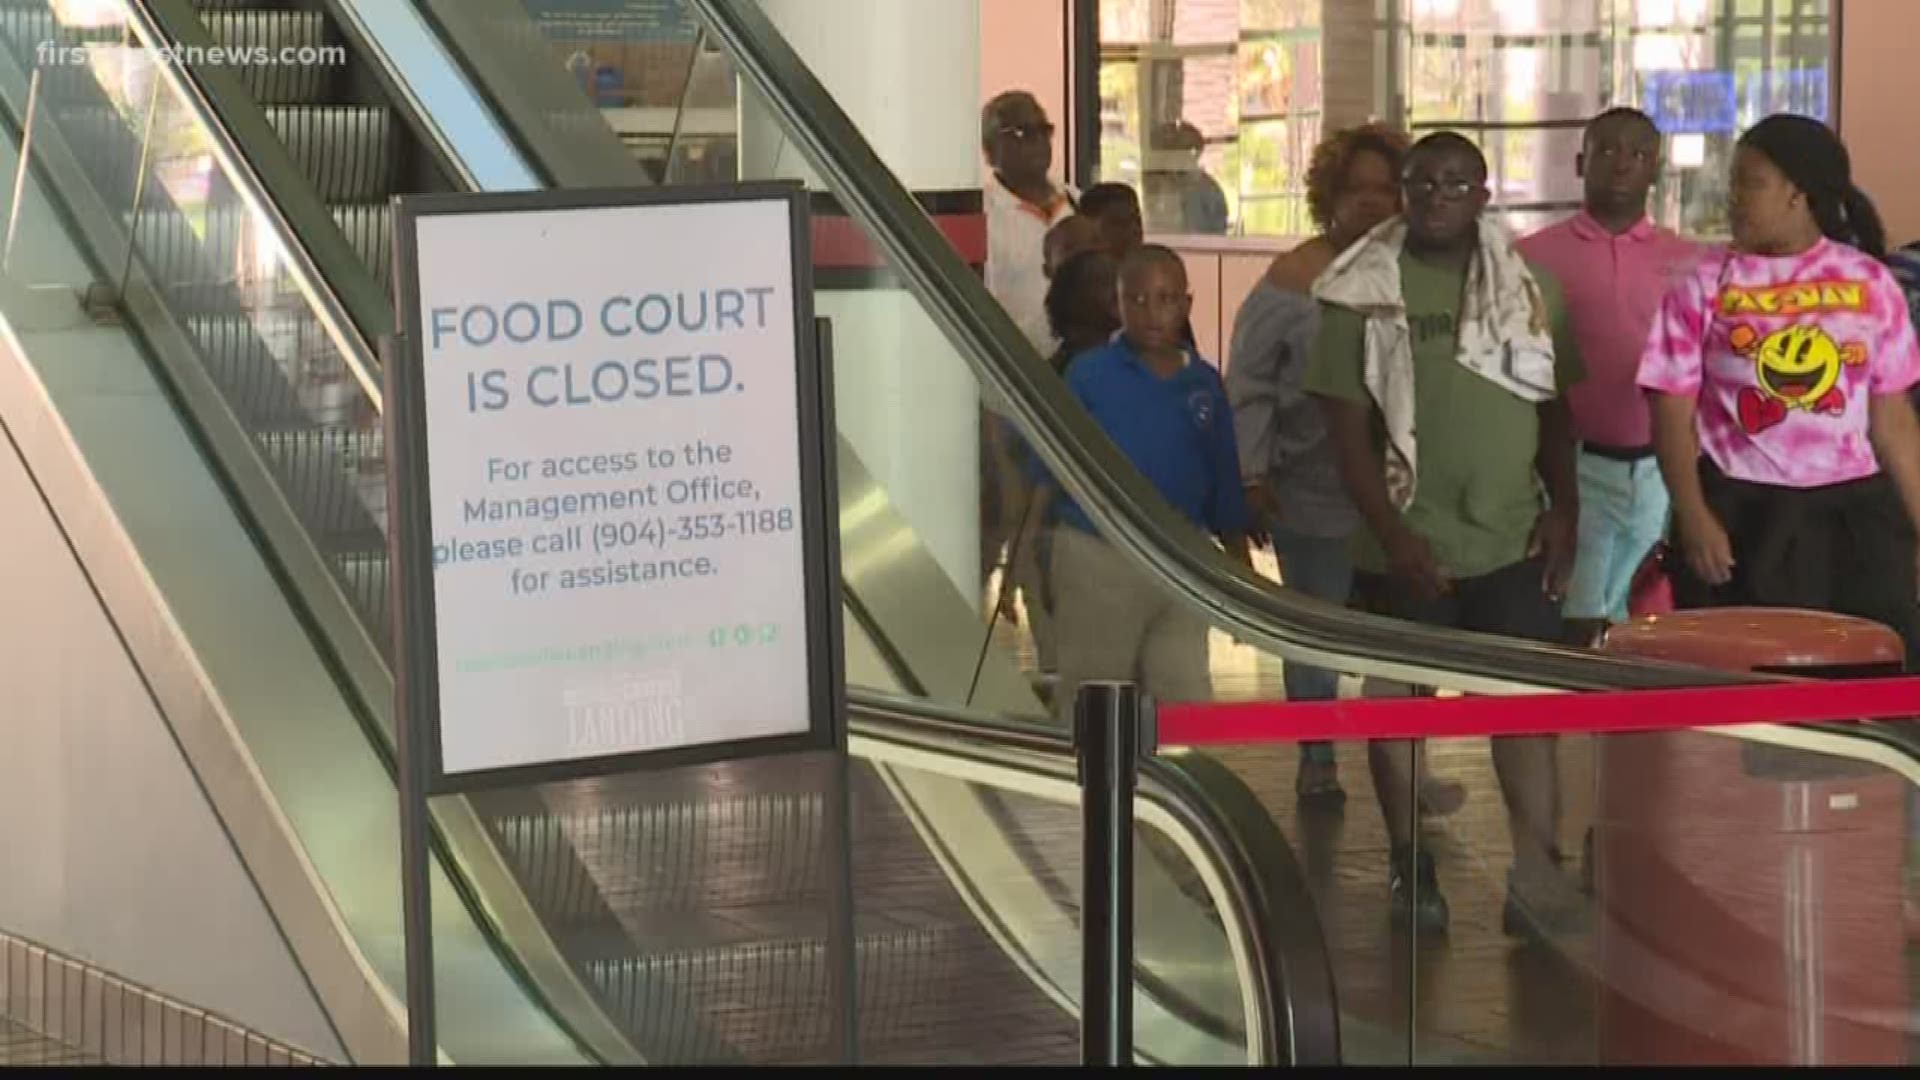 The fortunes of The Jacksonville Landing continue to decline. The iconic, orange-roofed riverfront mall has closed its food court. In fact, it closed the mall's entire second floor.